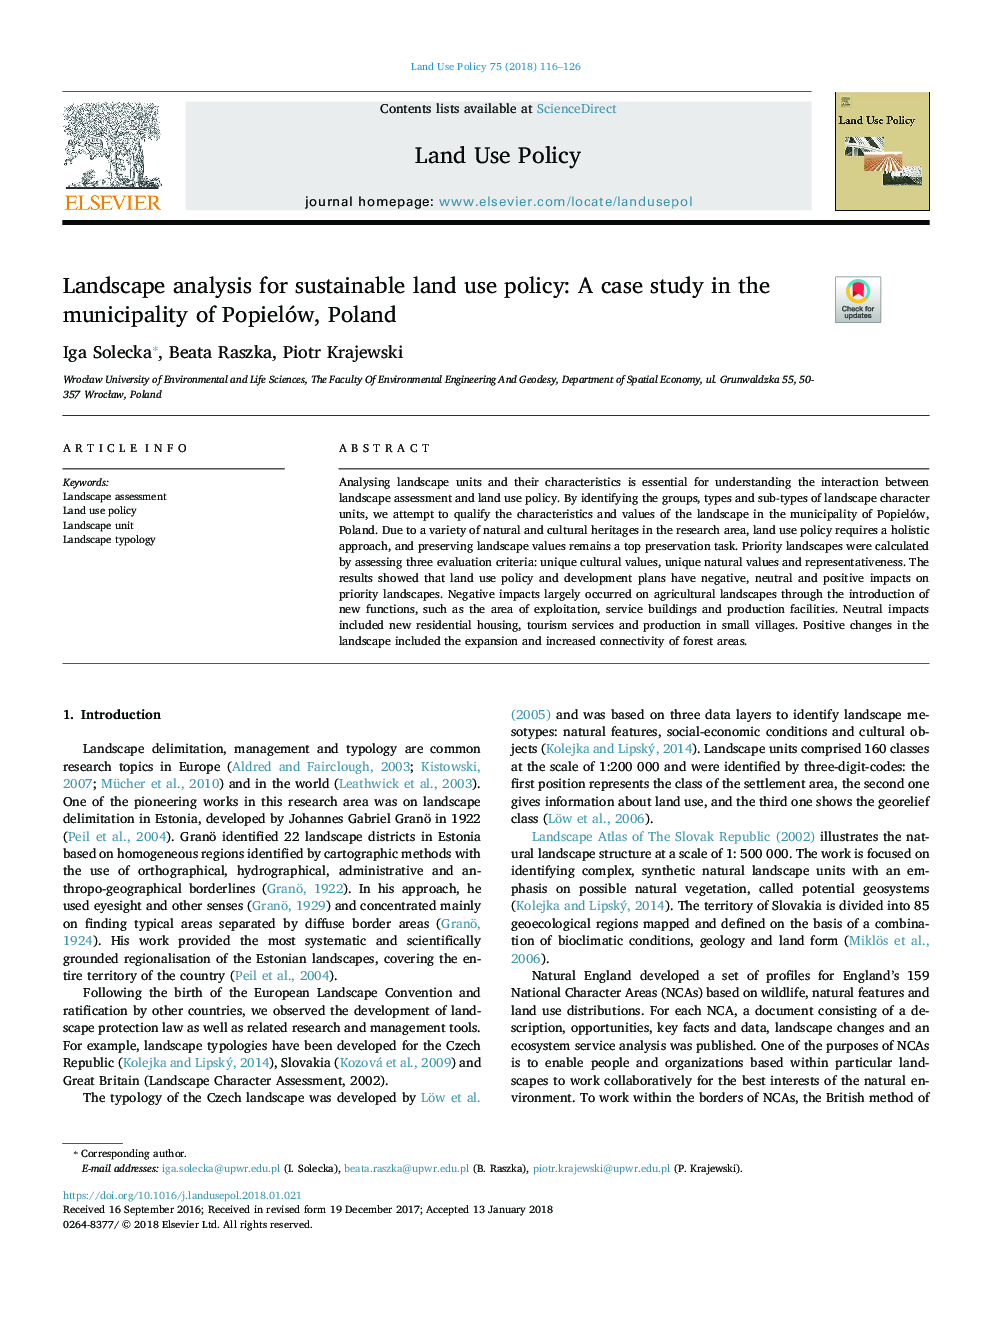 Landscape analysis for sustainable land use policy: A case study in the municipality of Popielów, Poland